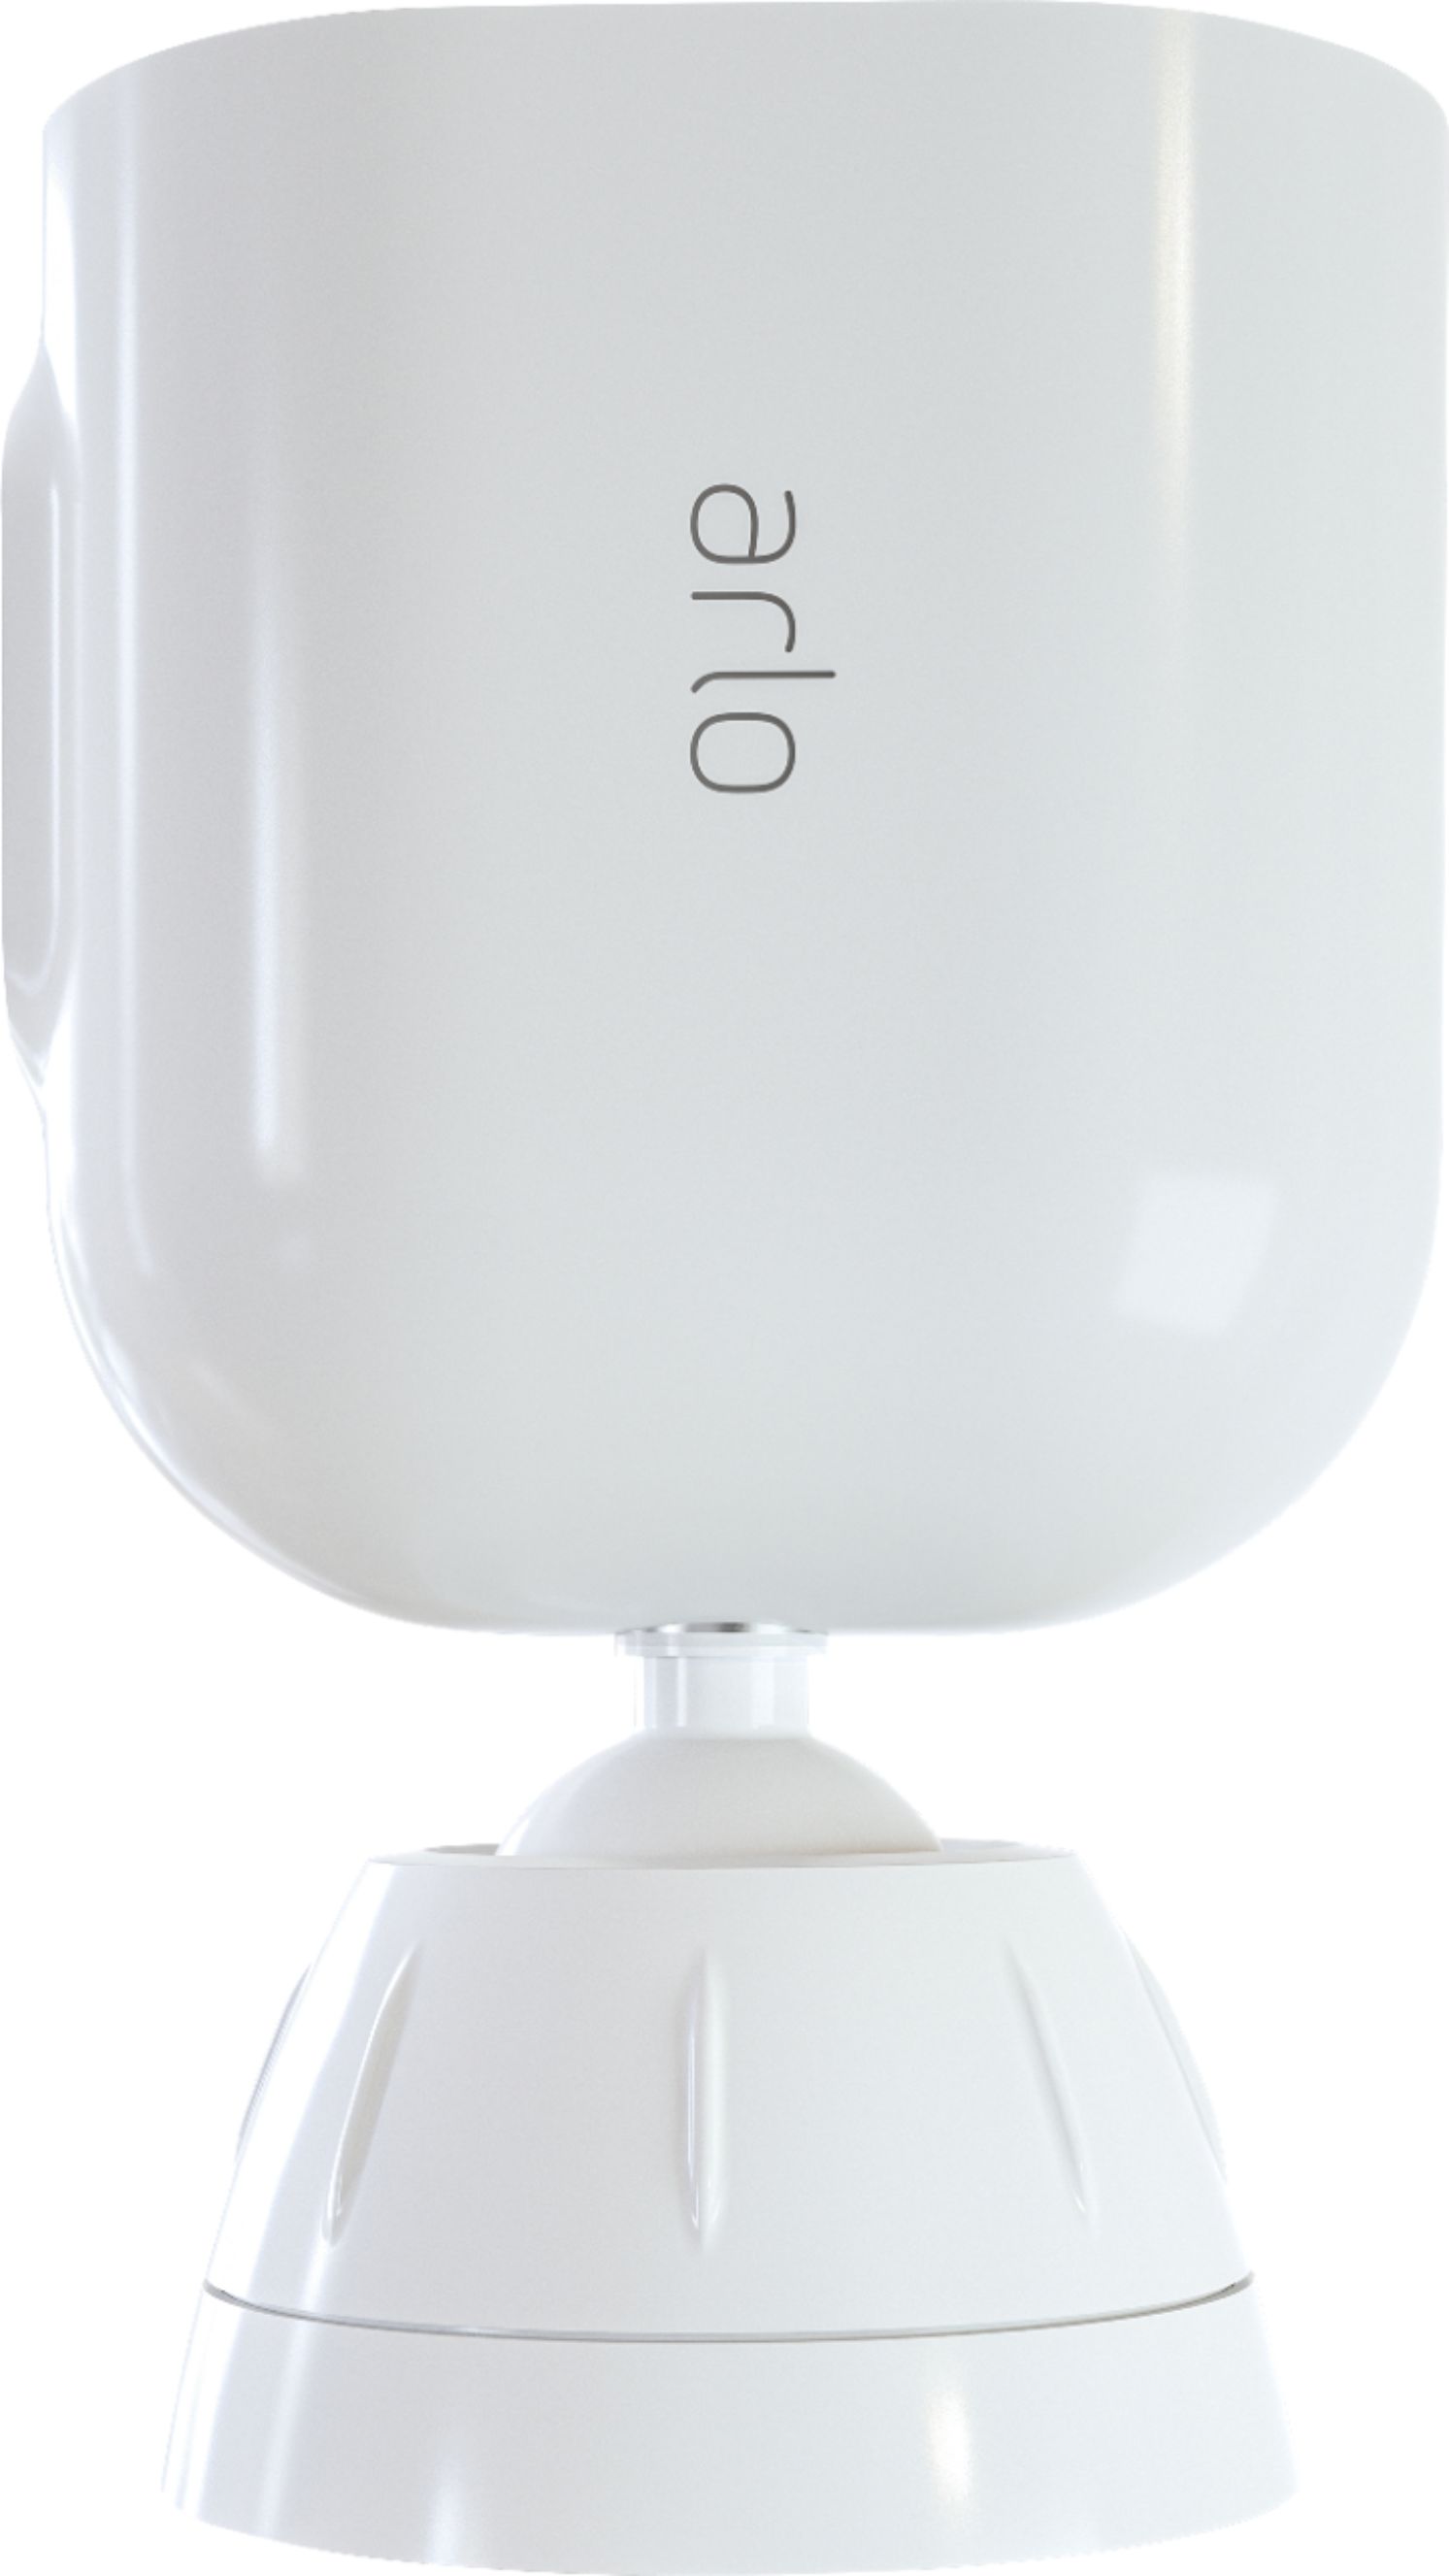 Arlo - Total Security Mount for Ultra, Ultra 2, Pro 3 and Pro 4 Cameras - White